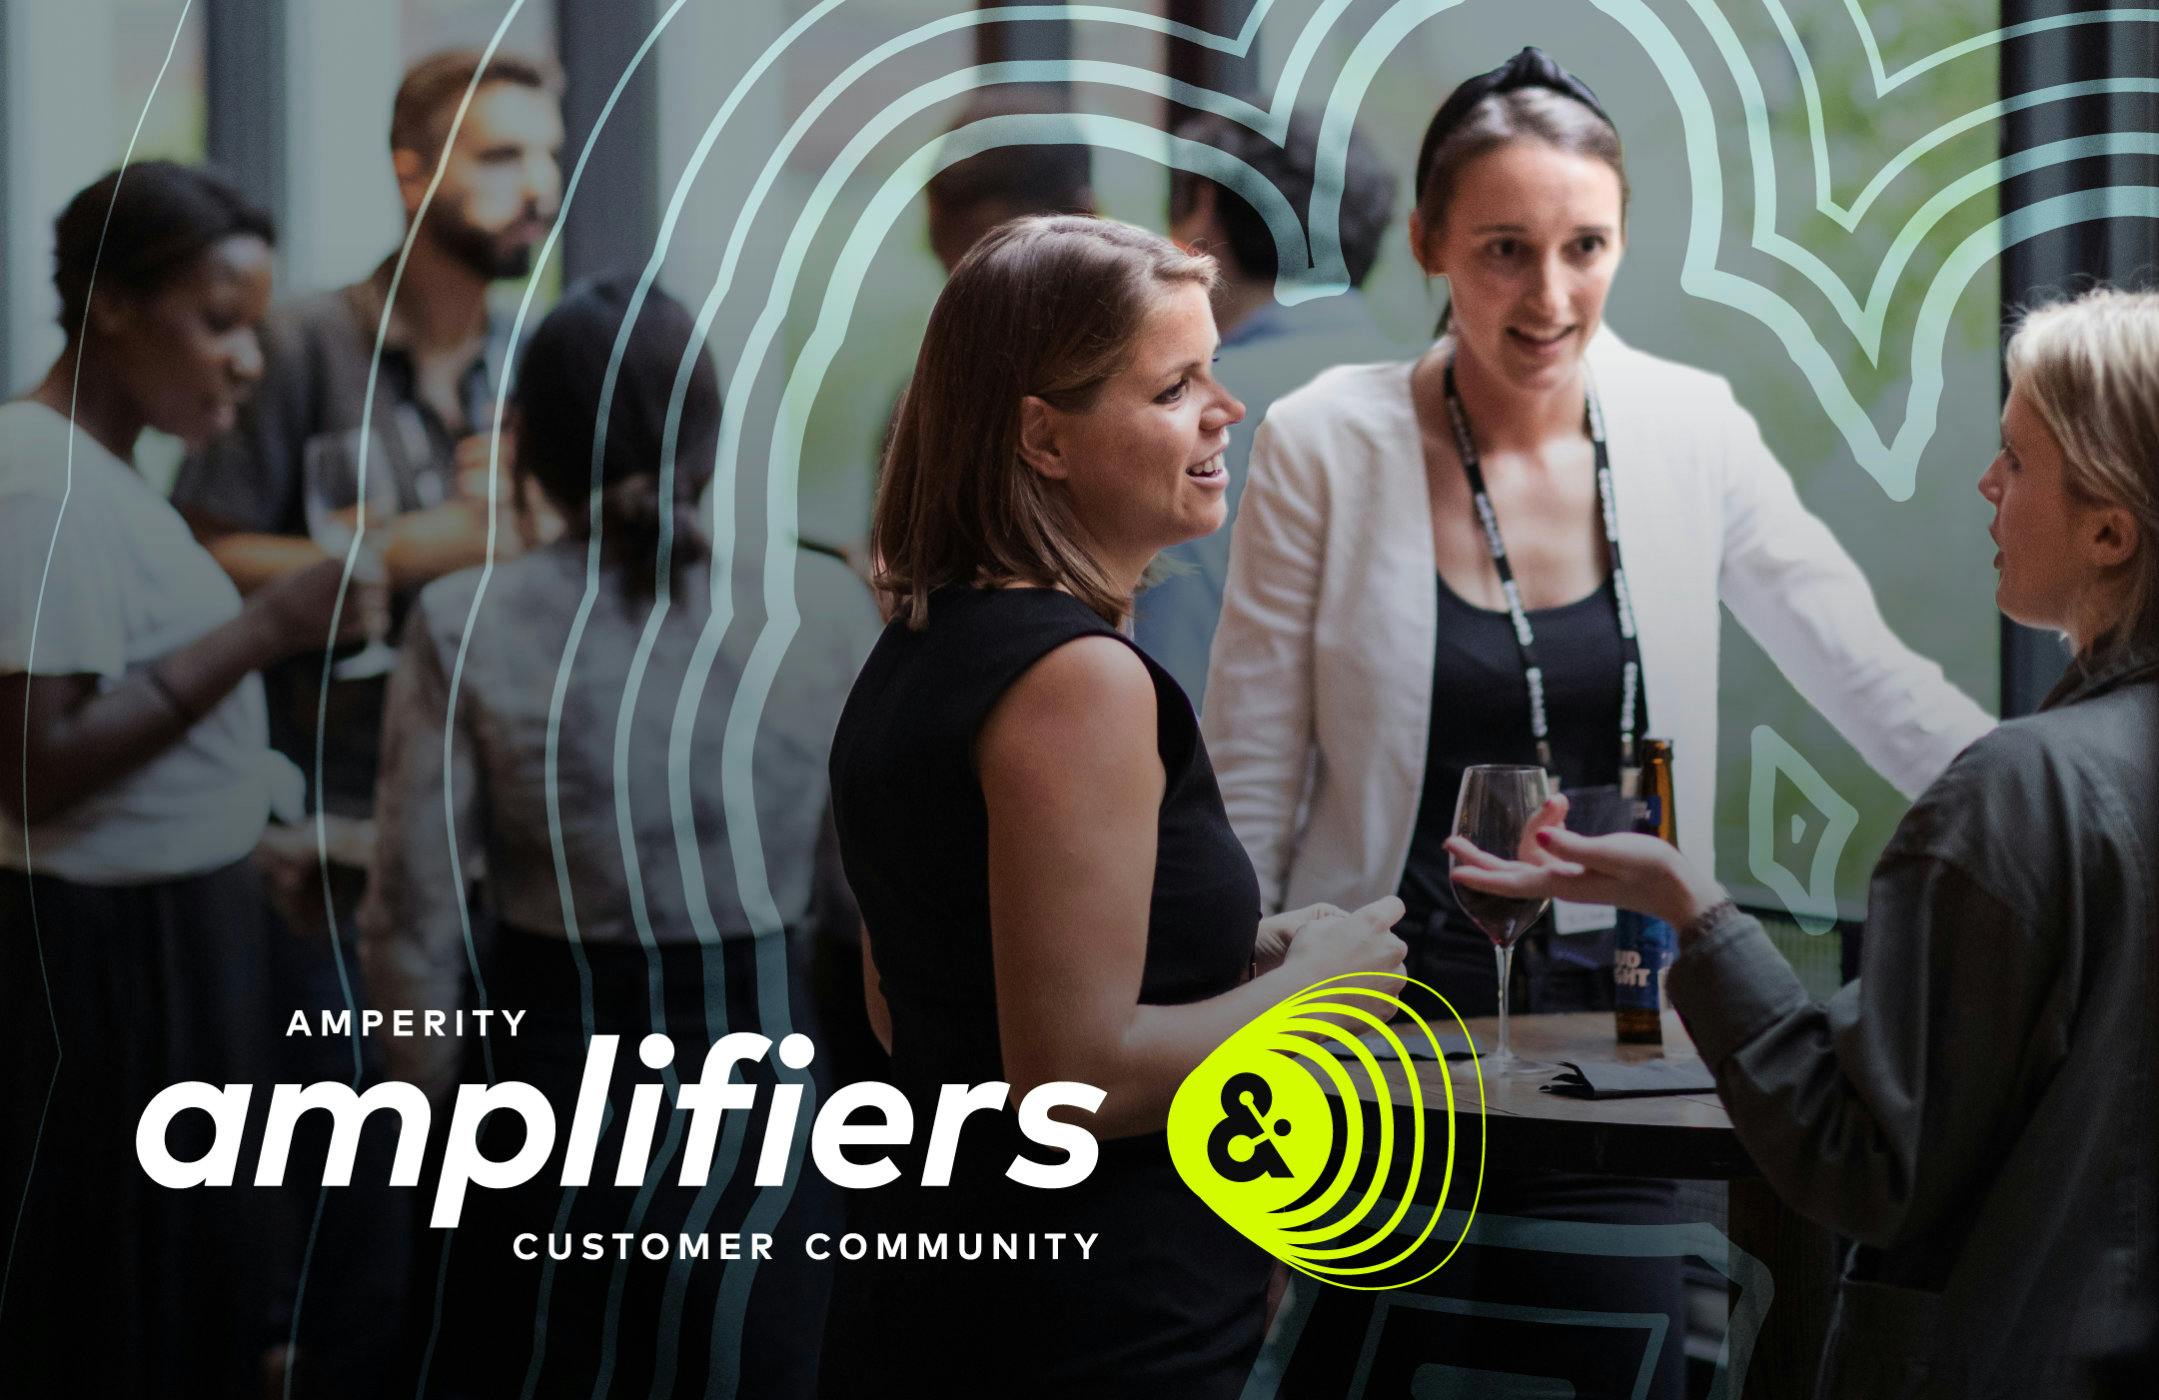 Promo image for Amplifiers of Amperity customers networking